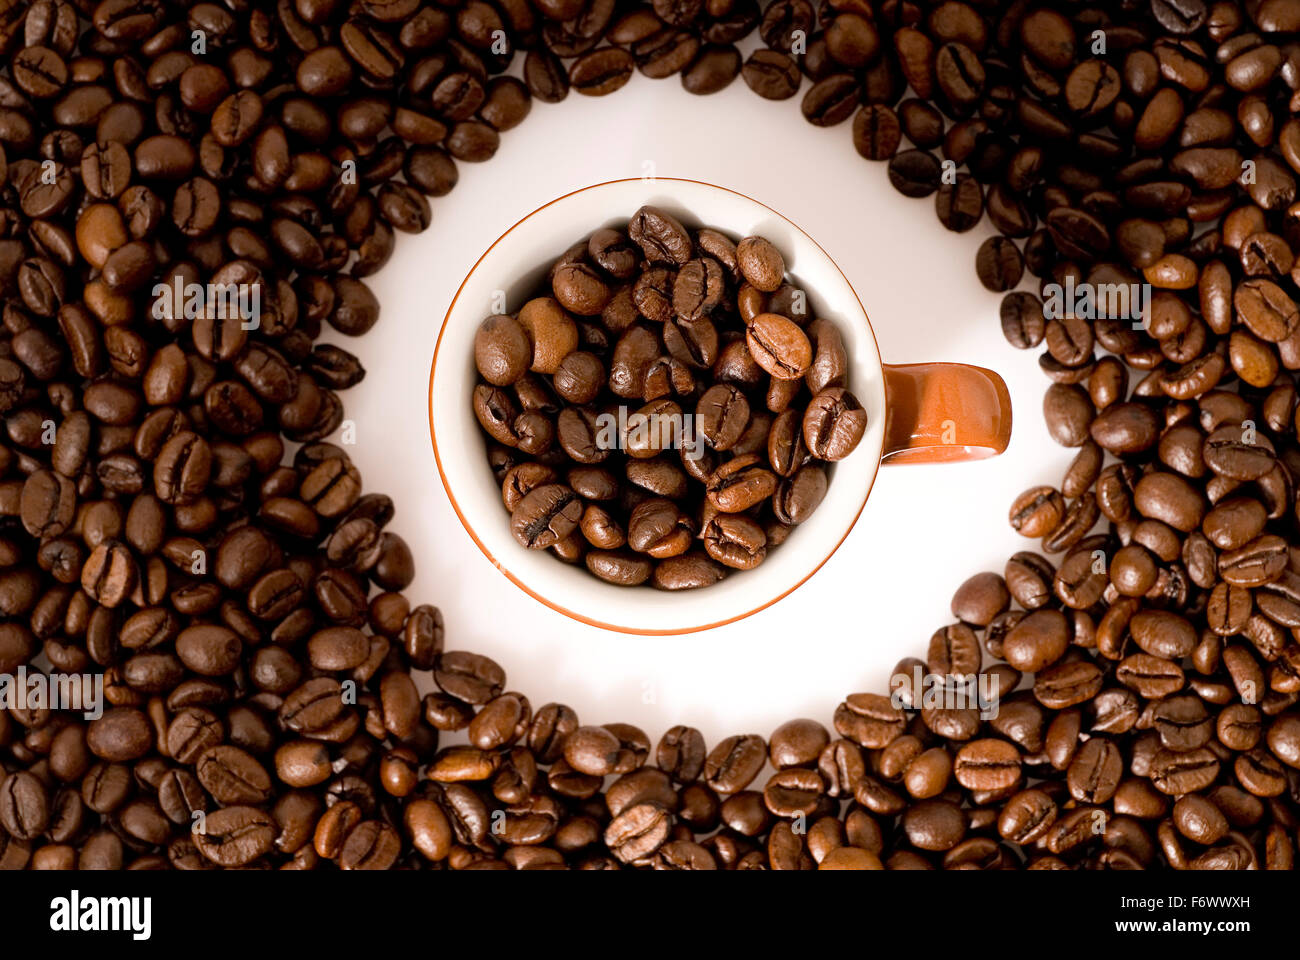 Espresso cup filled with coffee beans Stock Photo